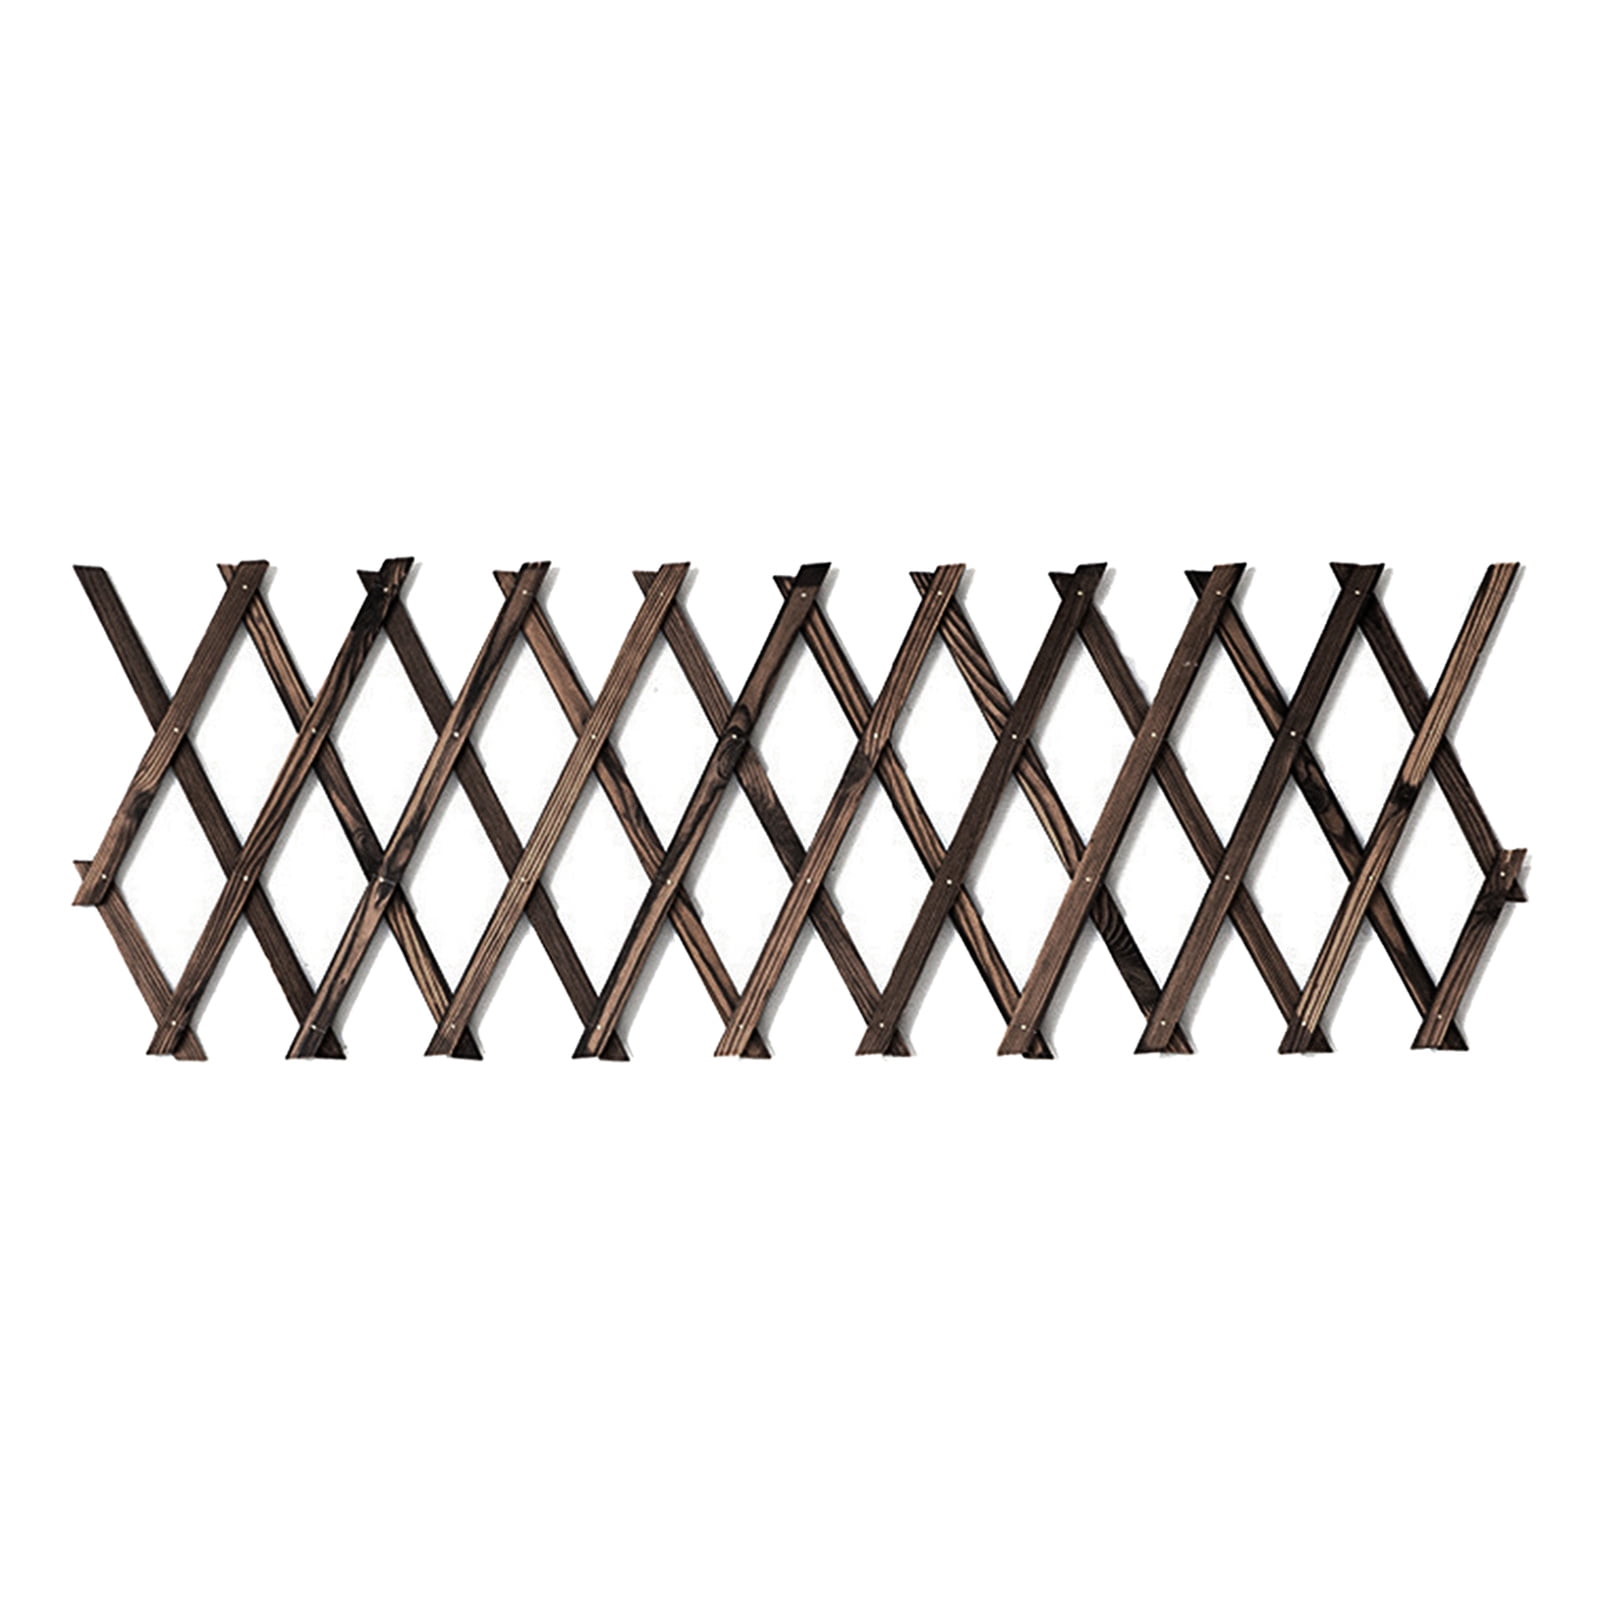 Details about    Wooden Lattice Wall Planter-Expandable Trellis for Climbing Plants with 5 1pc 